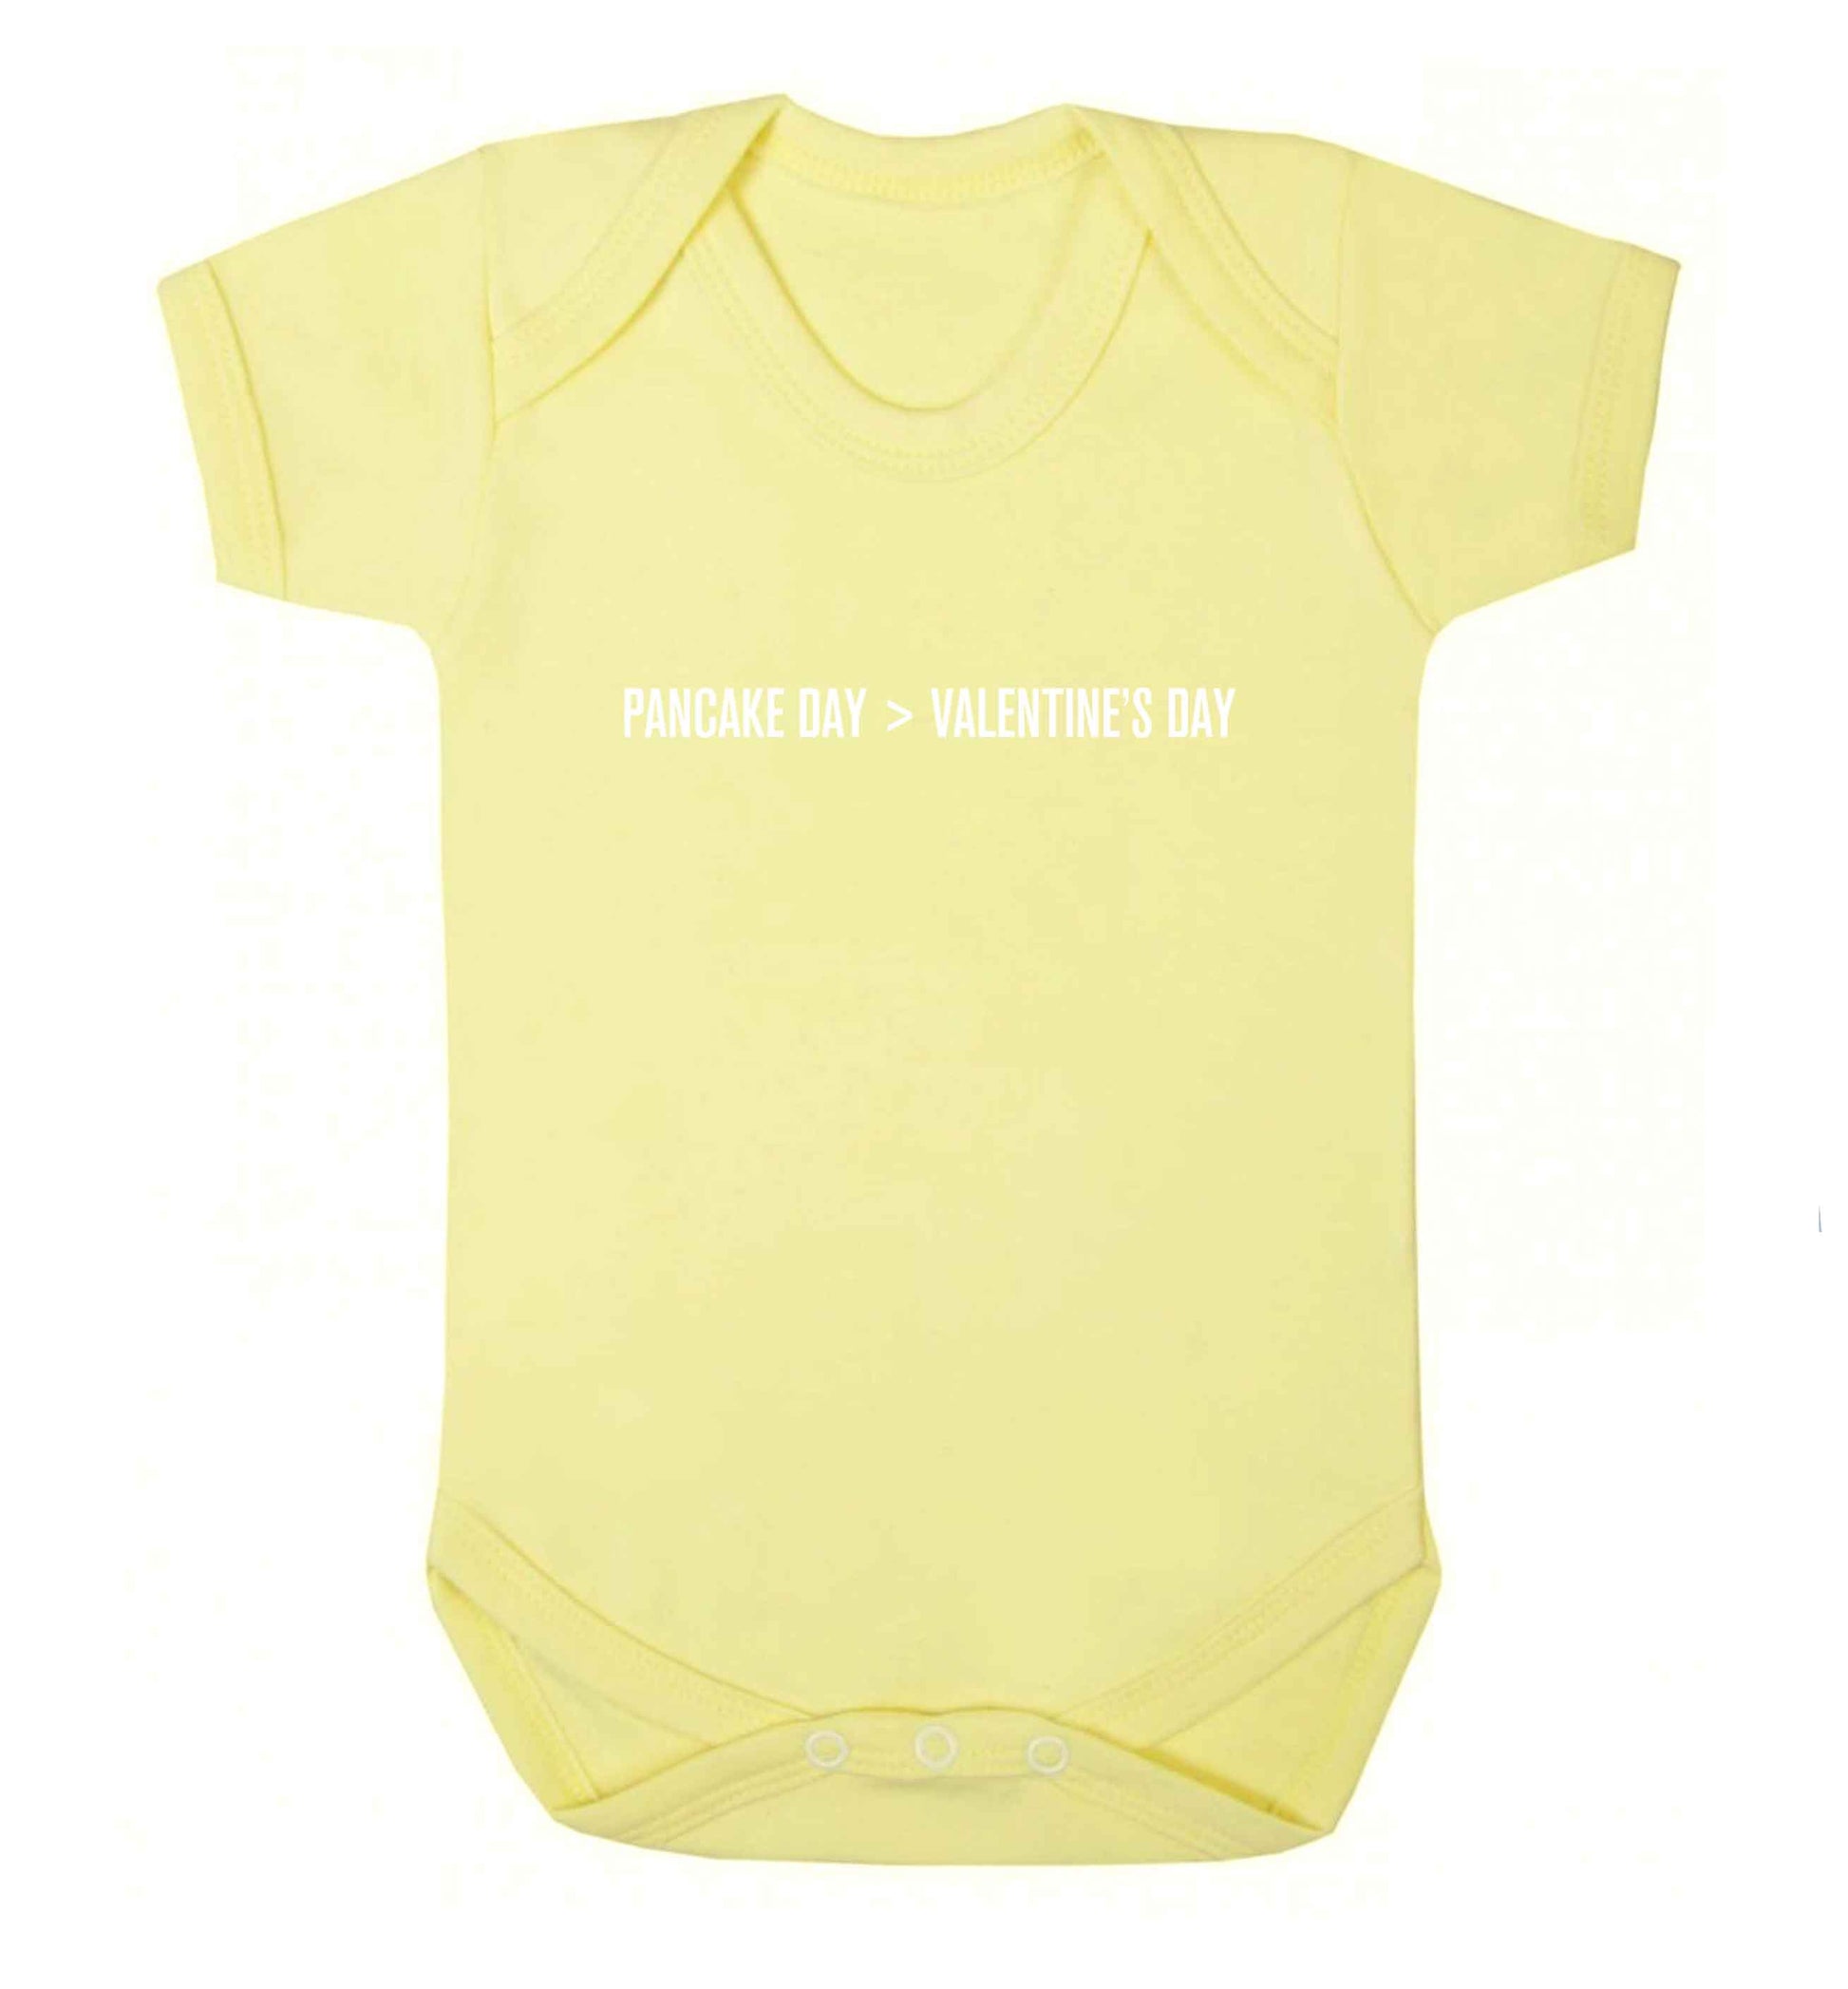 Pancake day > valentines day baby vest pale yellow 18-24 months